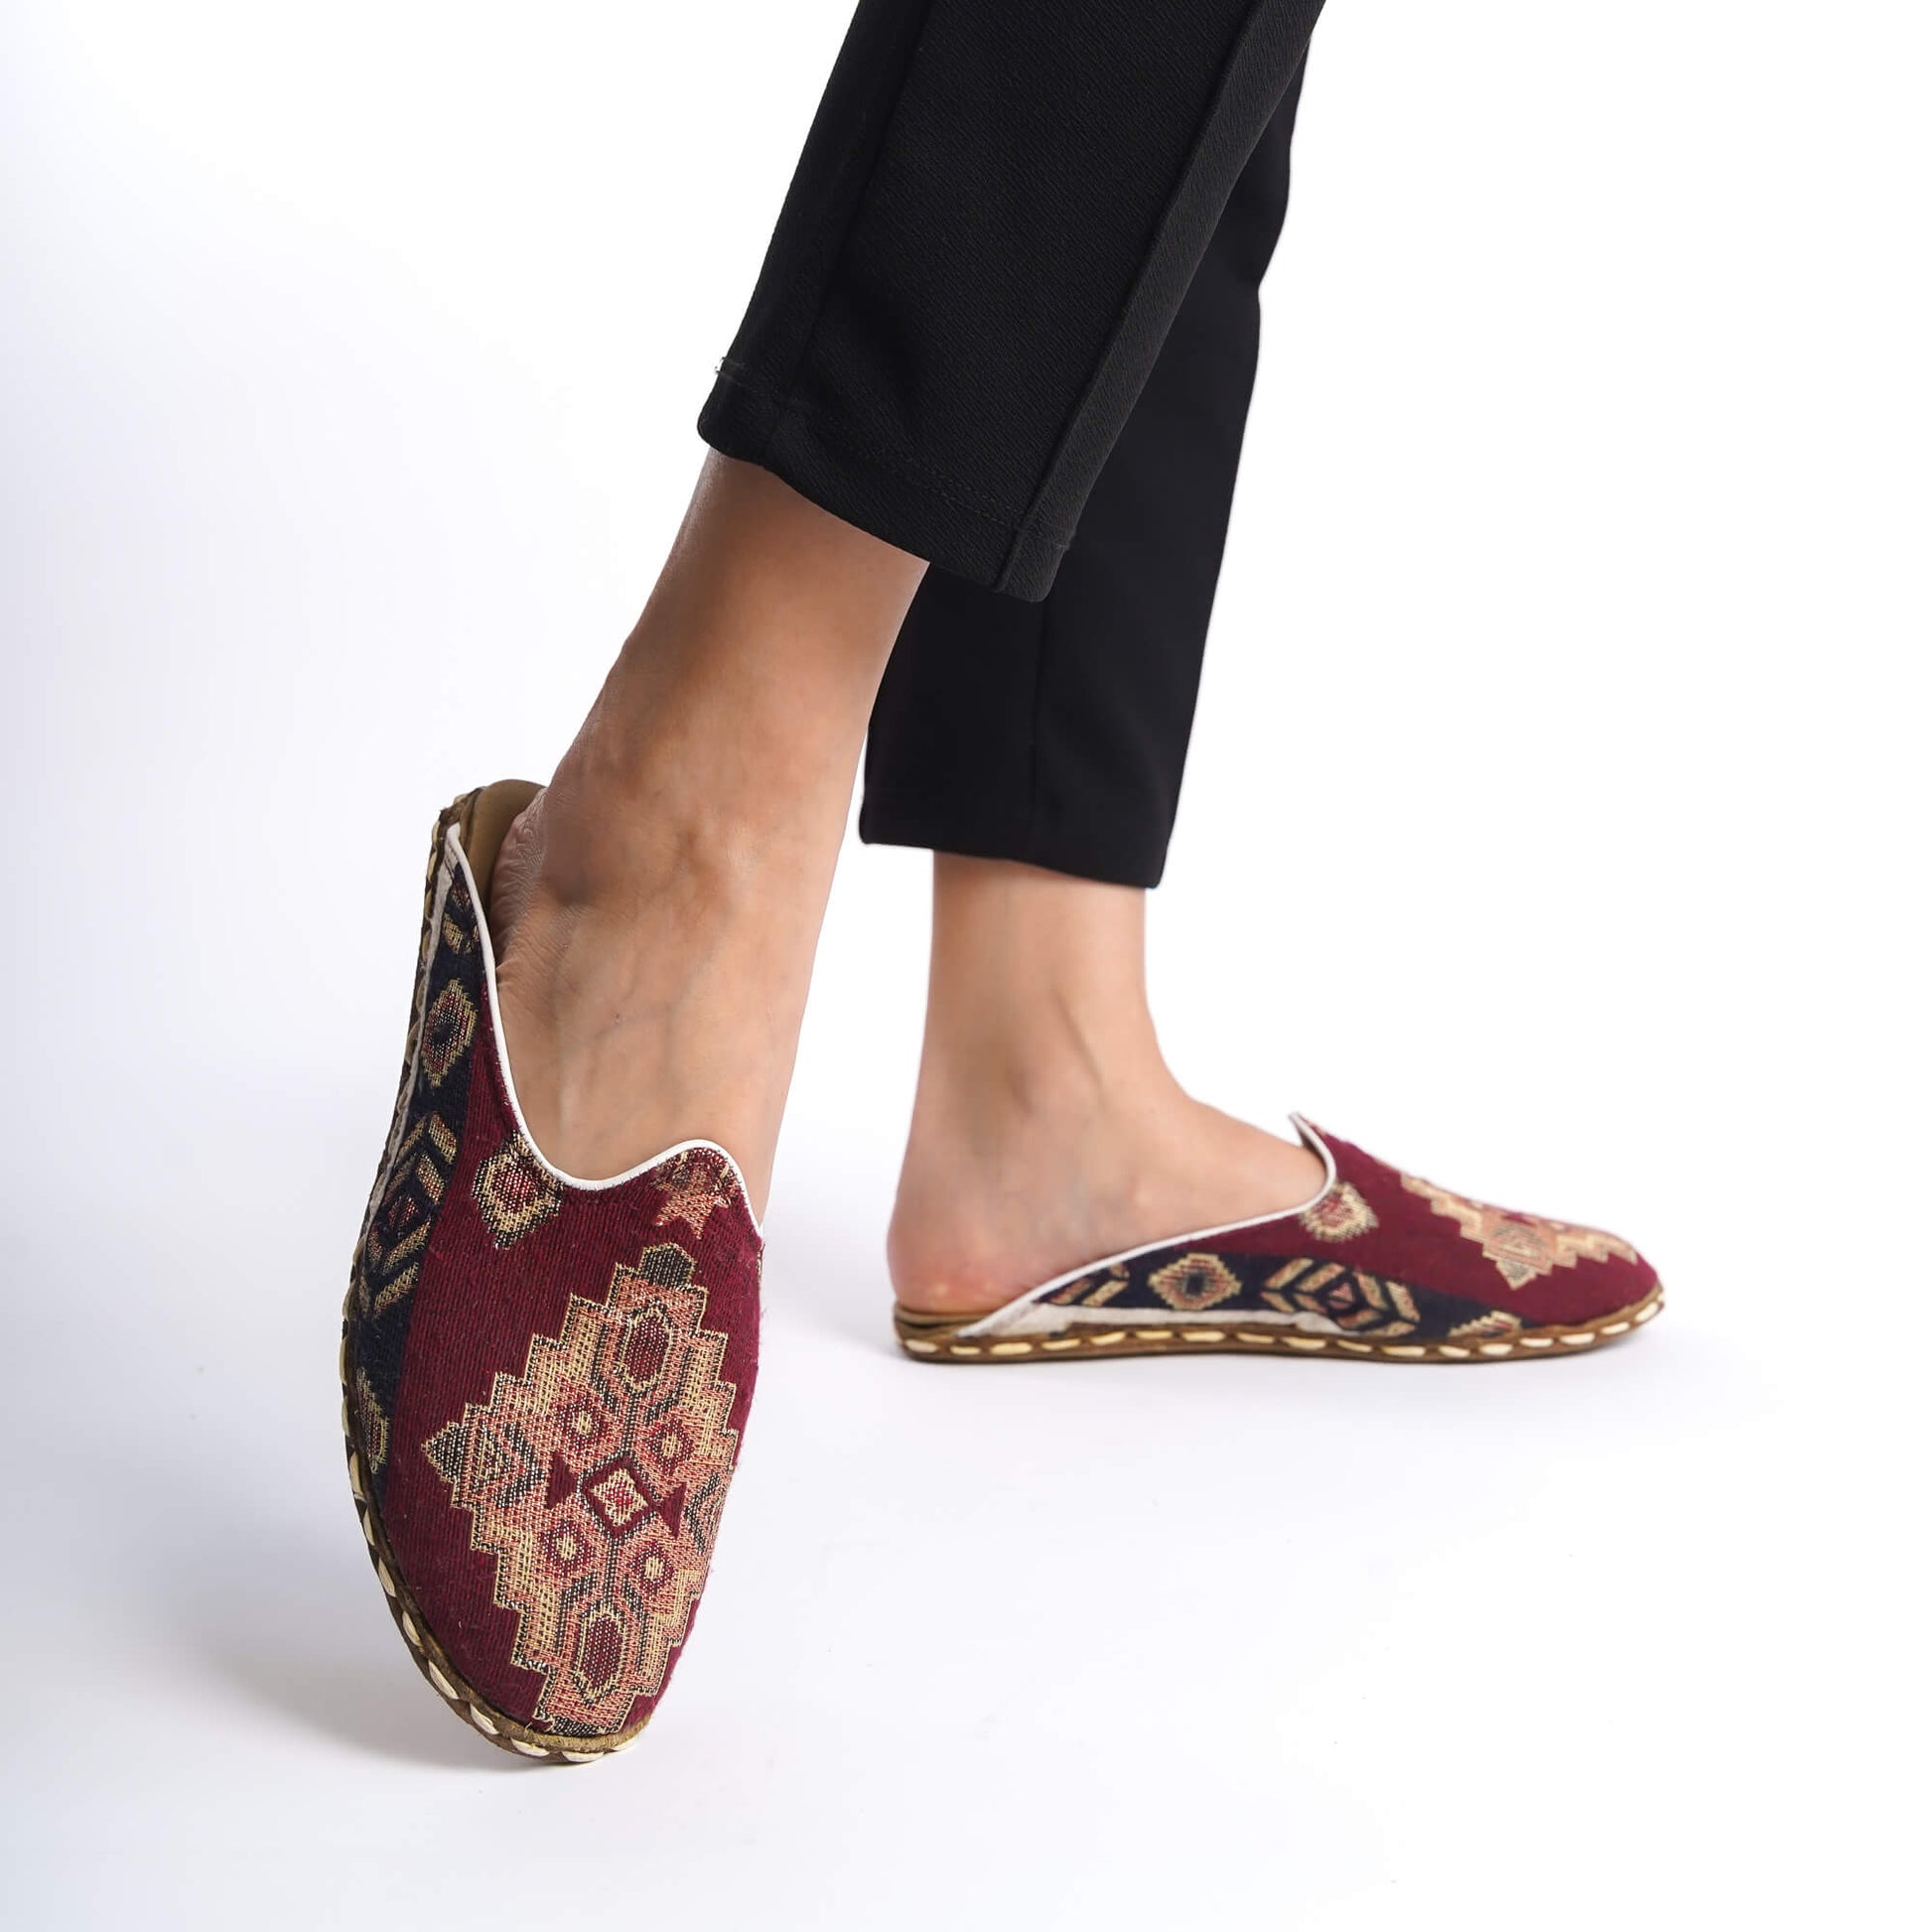 Zero-Drop Mules with Red and Gold Turkish Kilim Patterns – Comfortable Slip-On Shoes for Natural Walking Experience